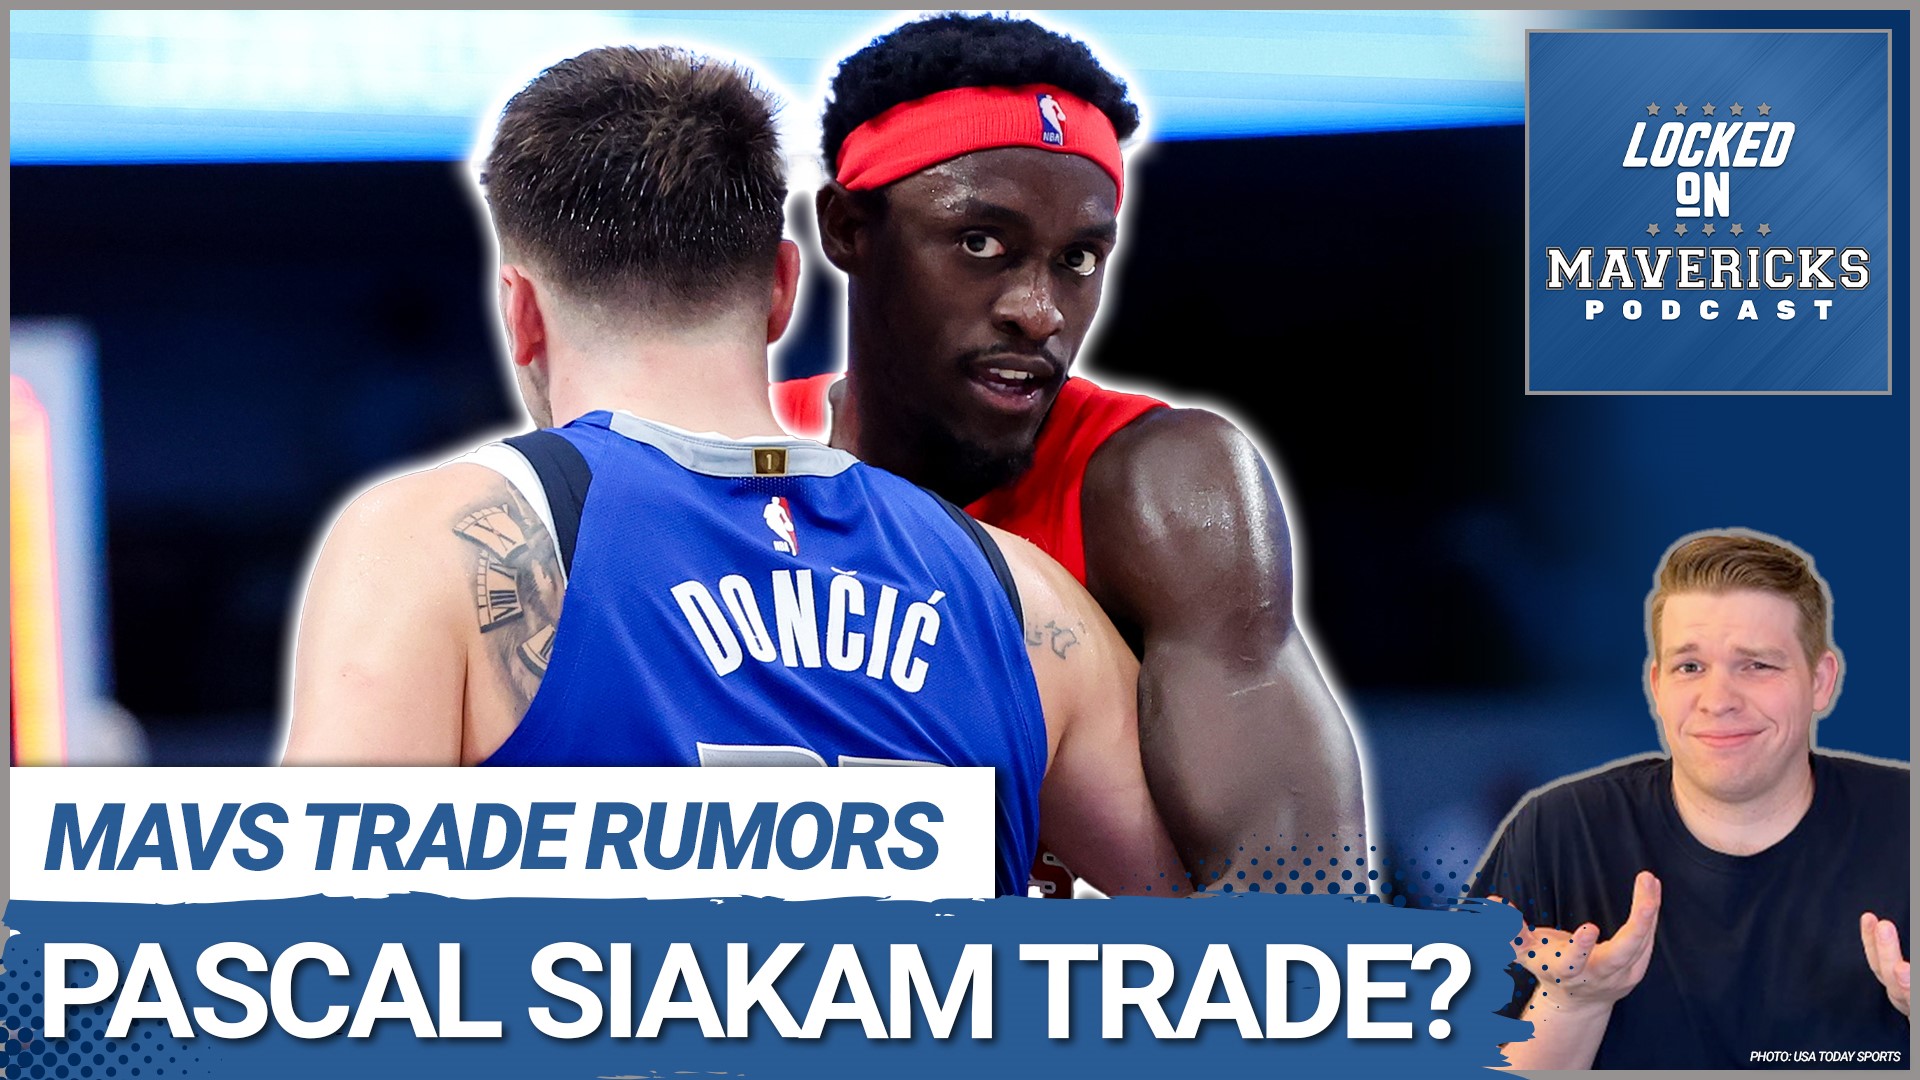 Nick Angstadt talks about the Pascal Siakam Trade Rumors and if the Mavs could potentially trade for him. What could the Mavs offer in a trade for Pascal Siakam?